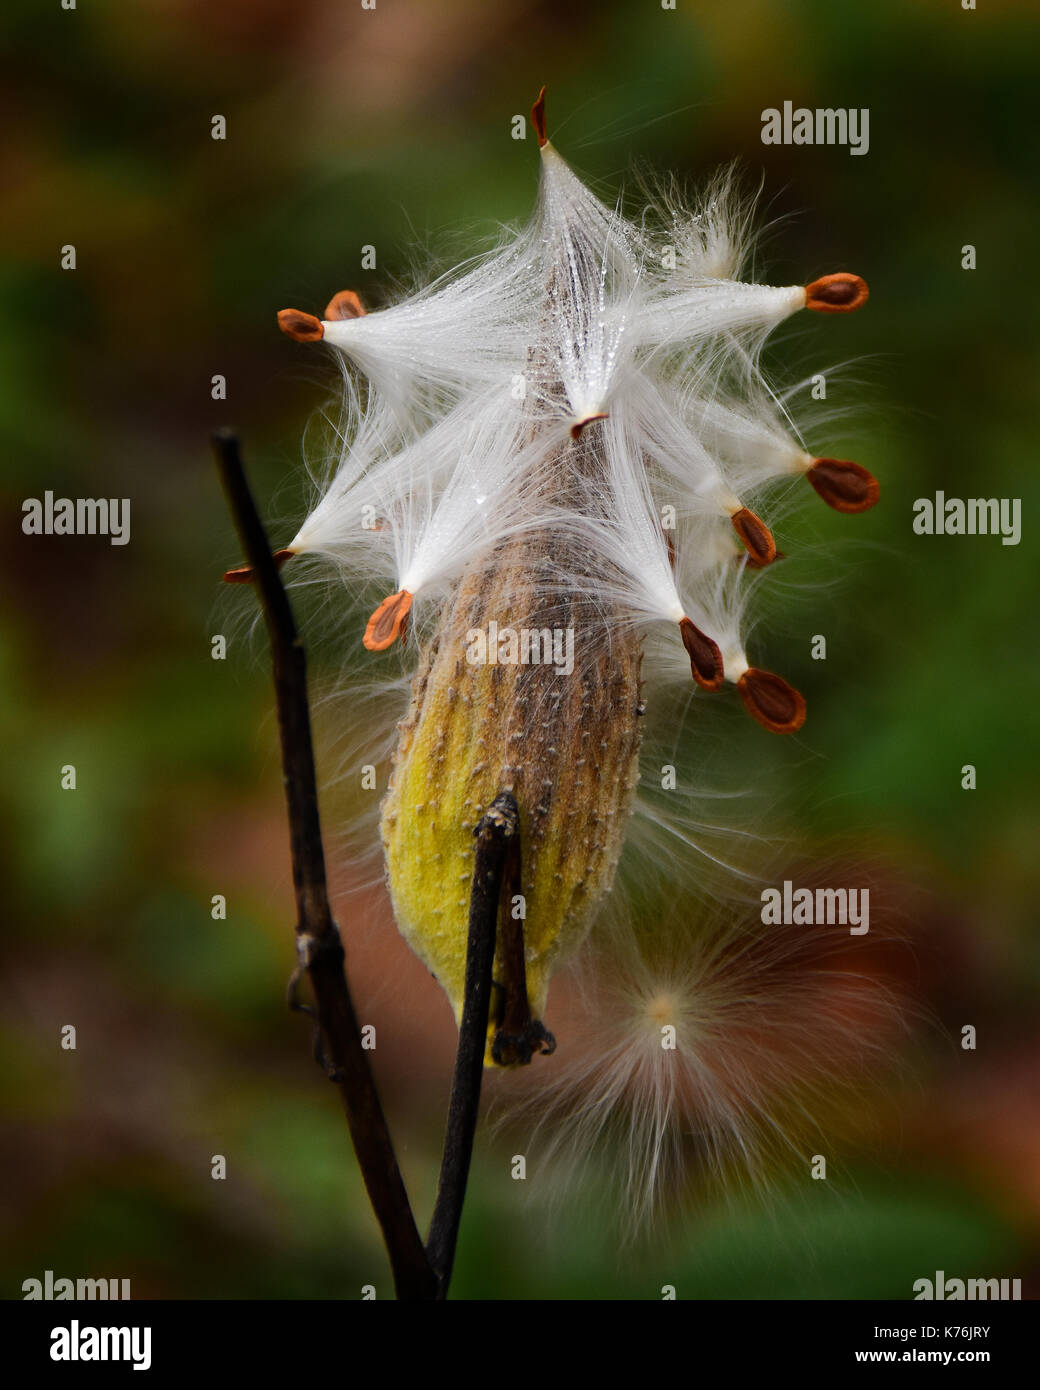 Milkweed, Asclepias syriaca, seedpod exploding to disperse seeds to the wind in a meadow in the Adirondack, New York forest. Stock Photo